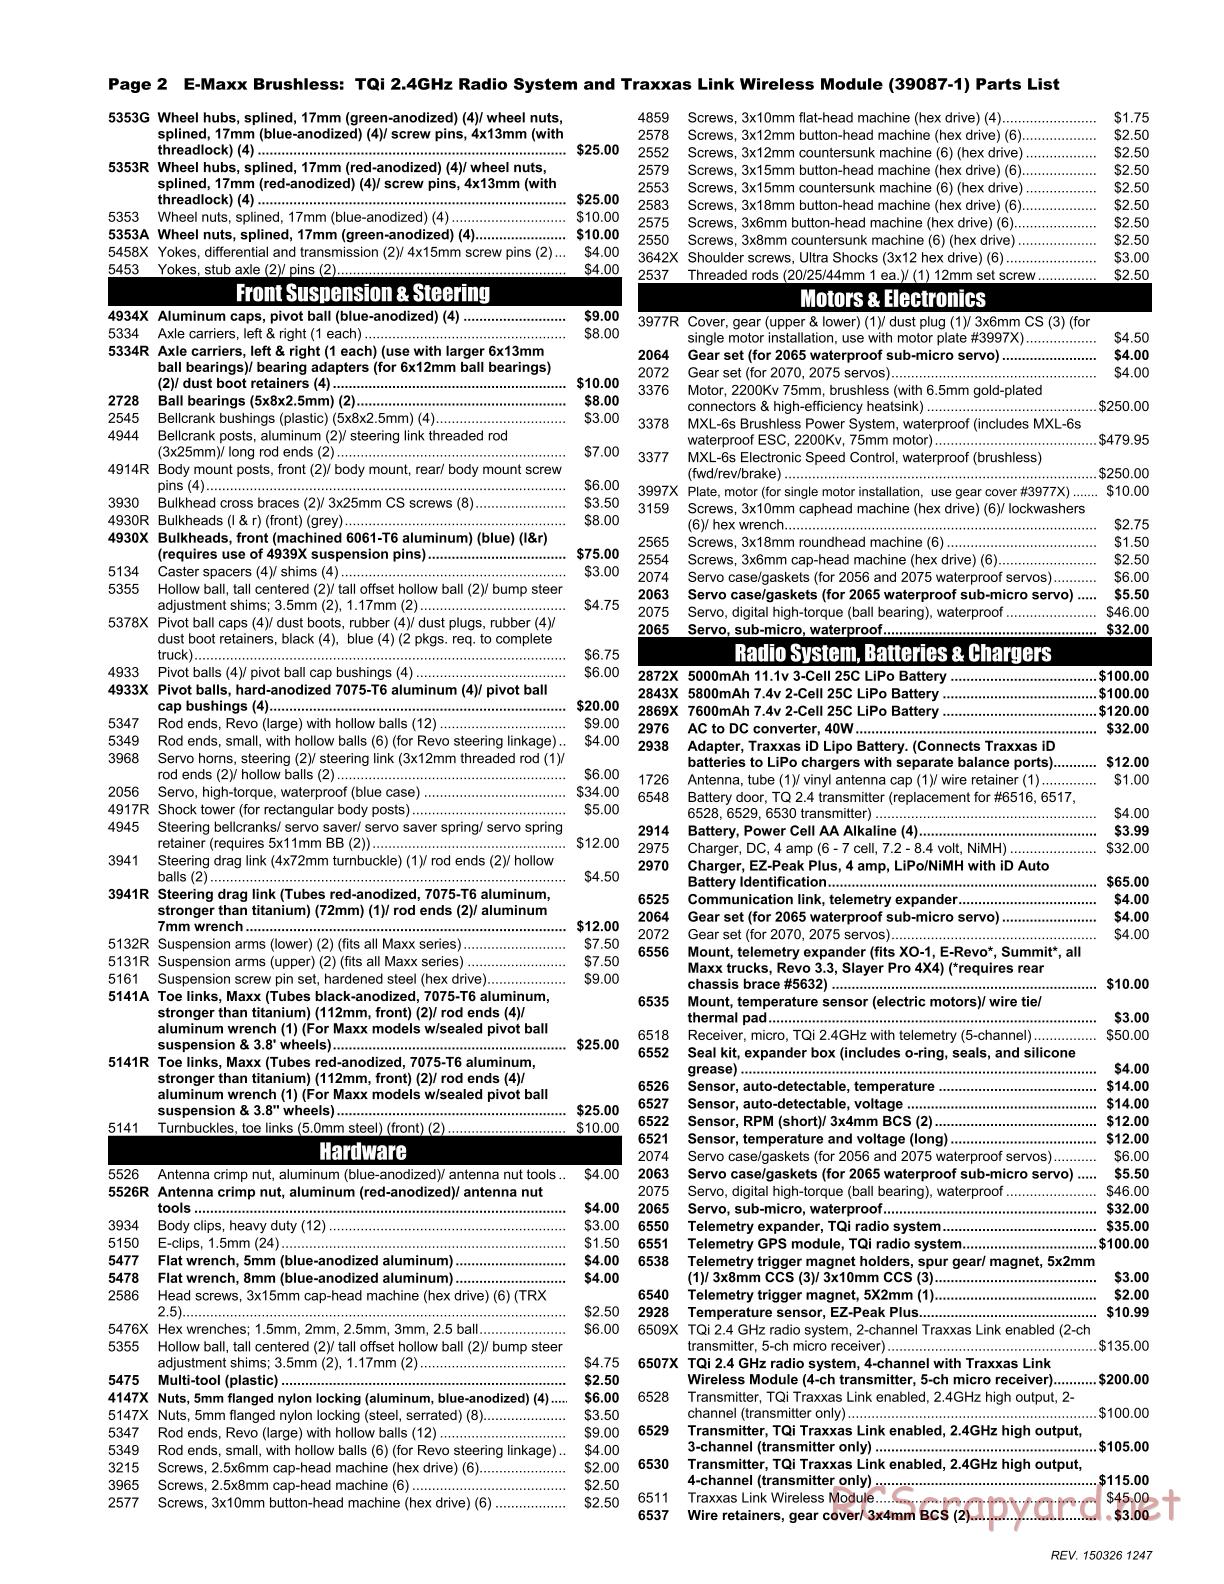 Traxxas - E-Maxx Brushless (2015) - Parts List - Page 2